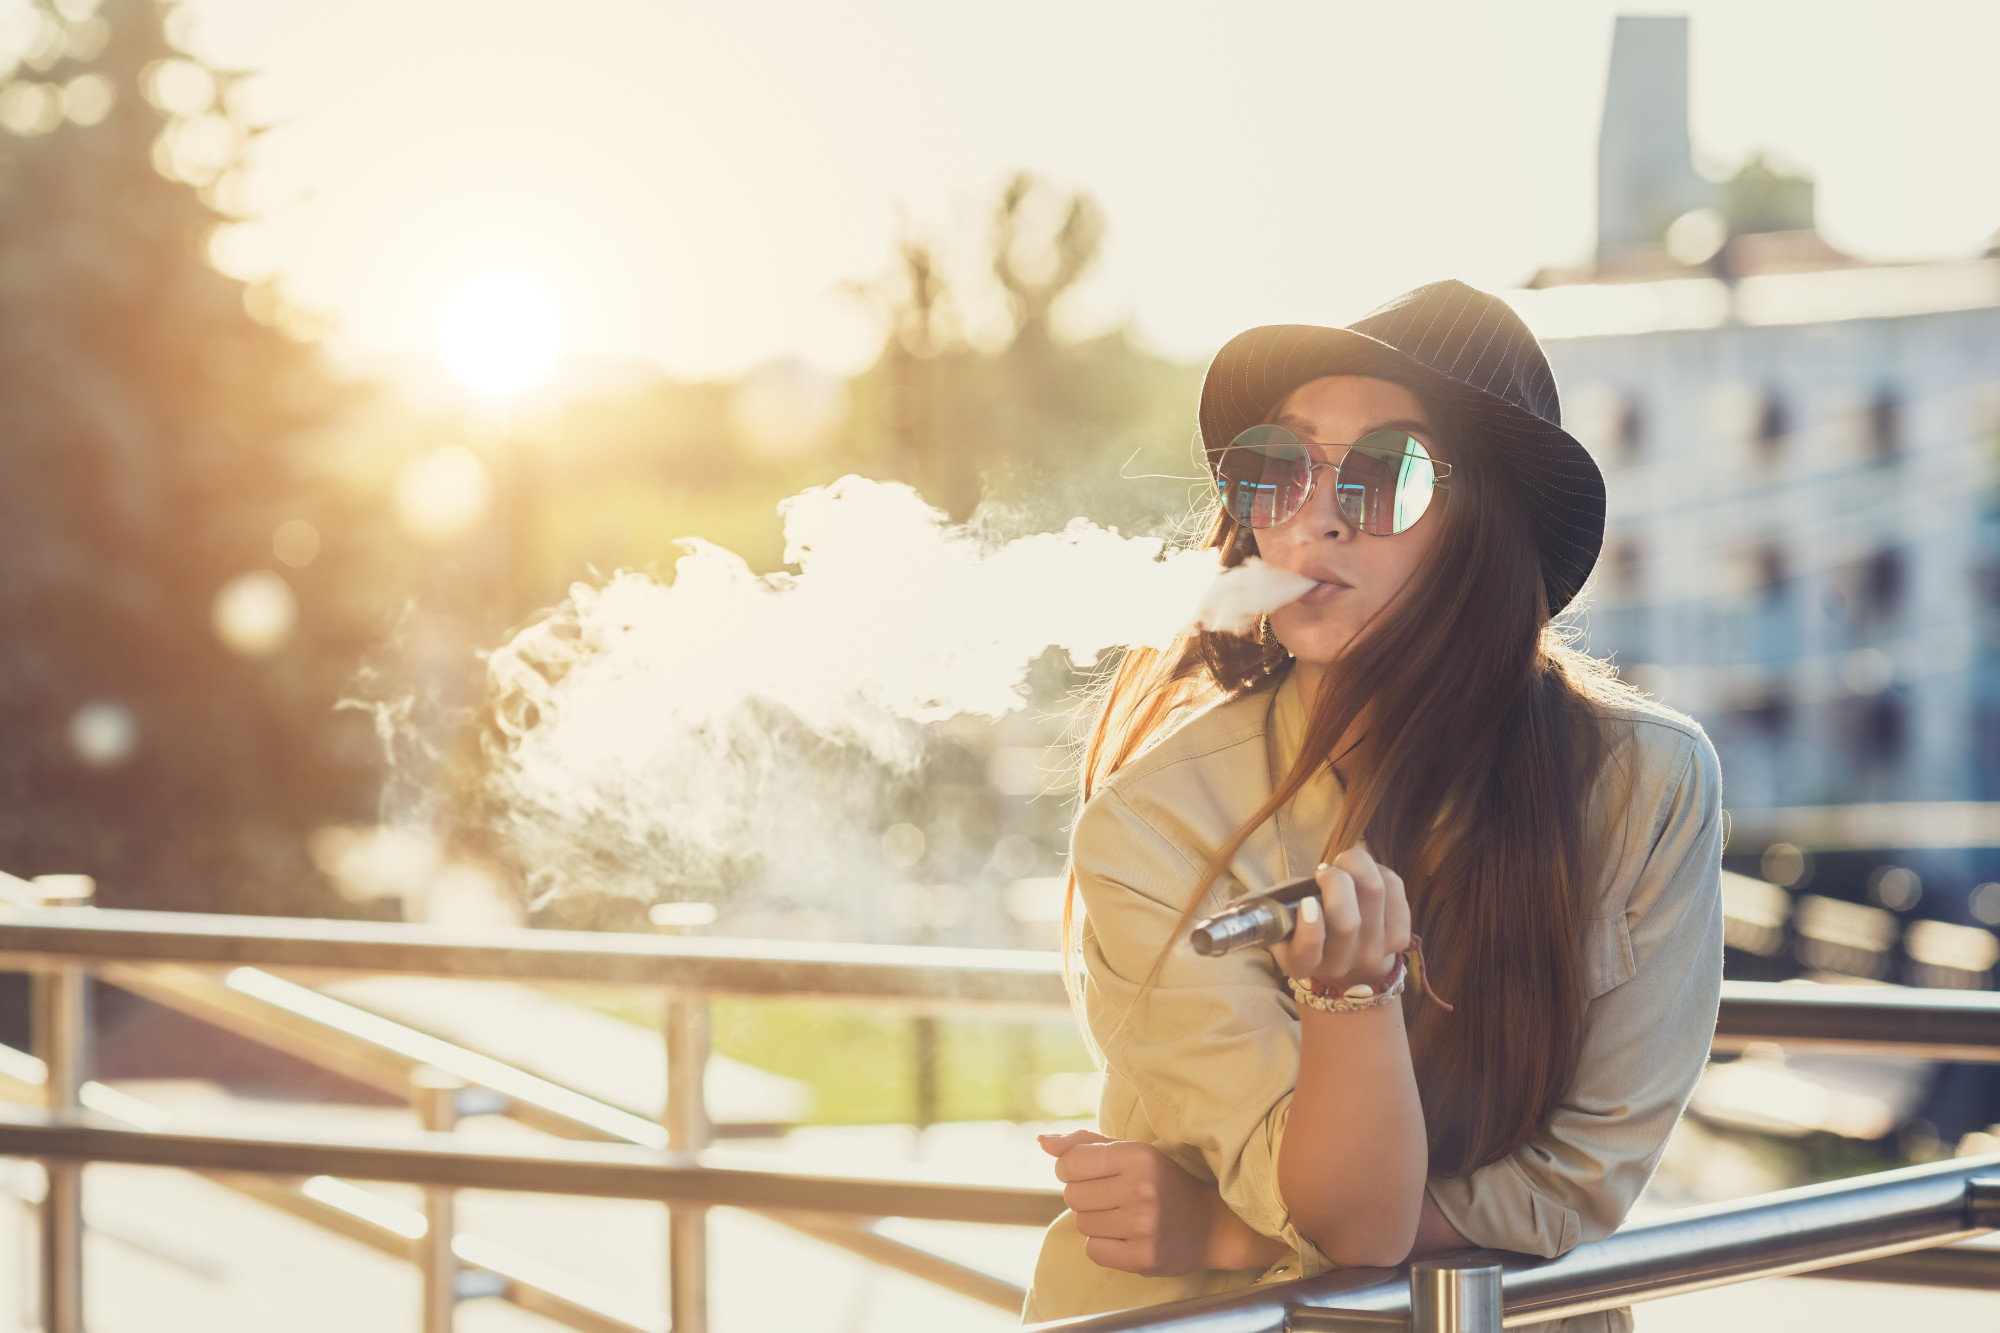 4 Important Things to Know About How to Use a Vape Pen